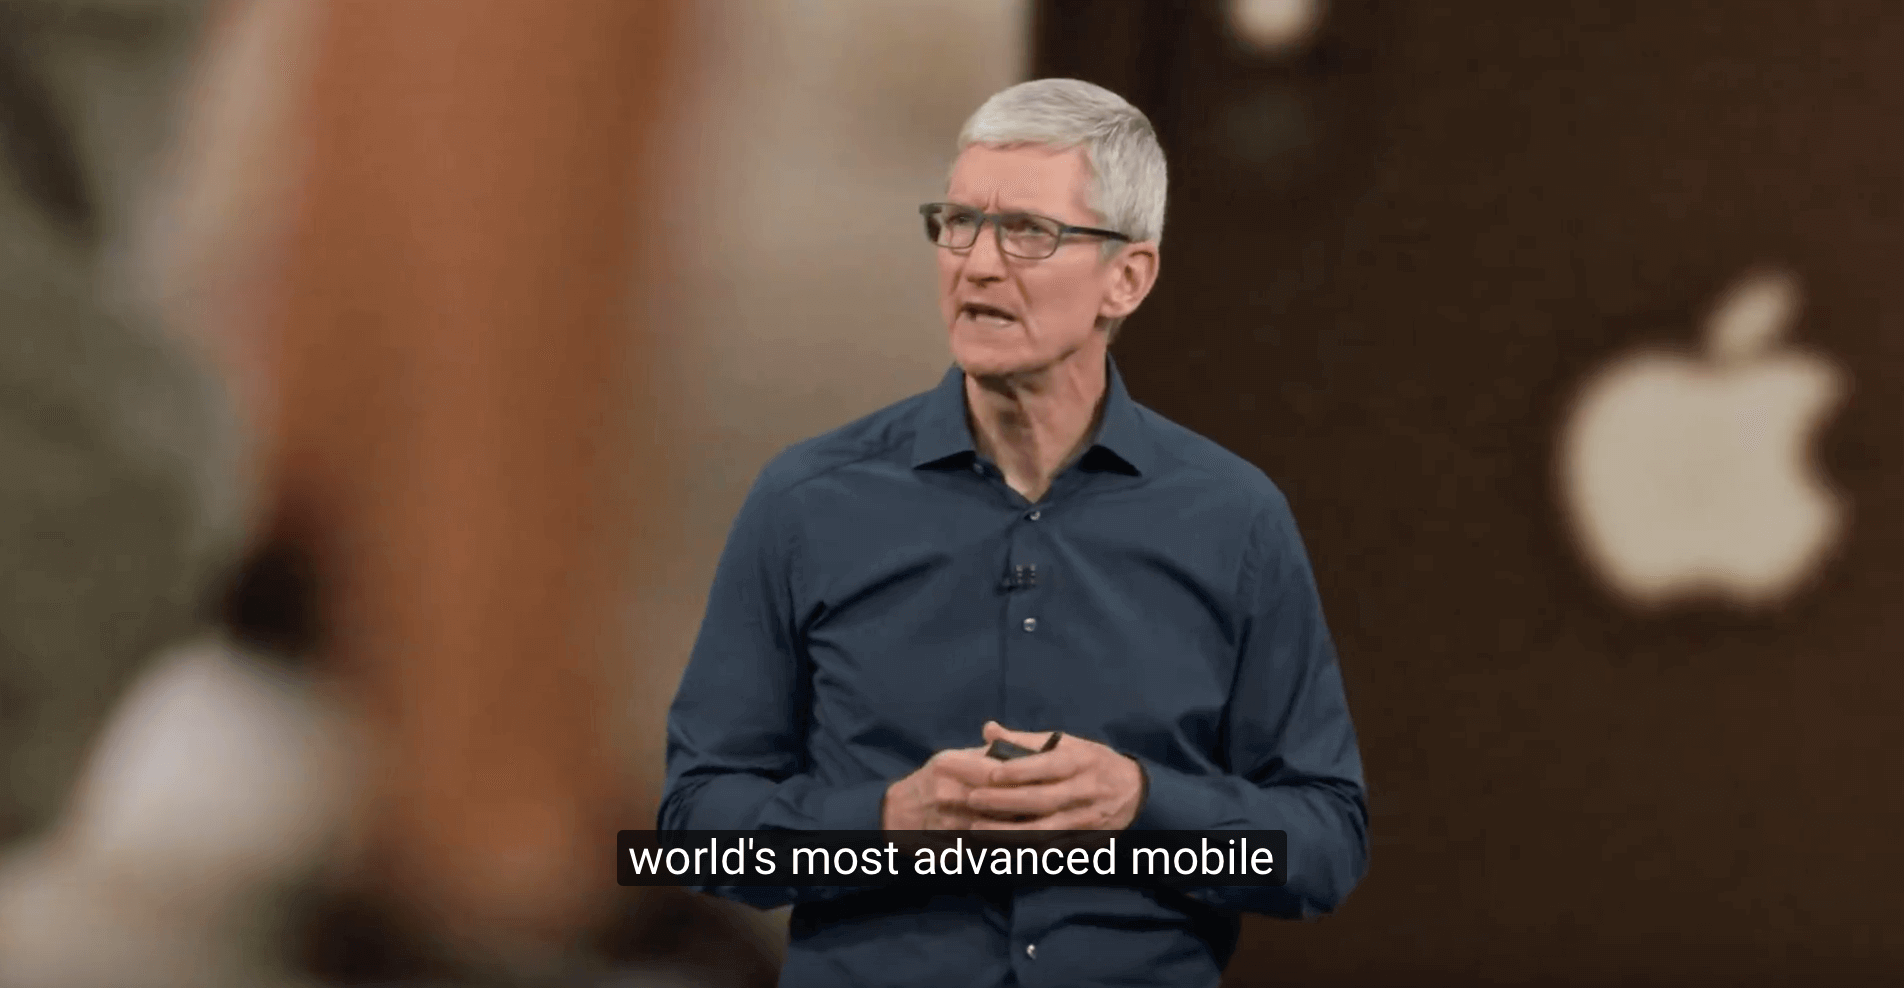 Why Apple Events No Longer Exciting?